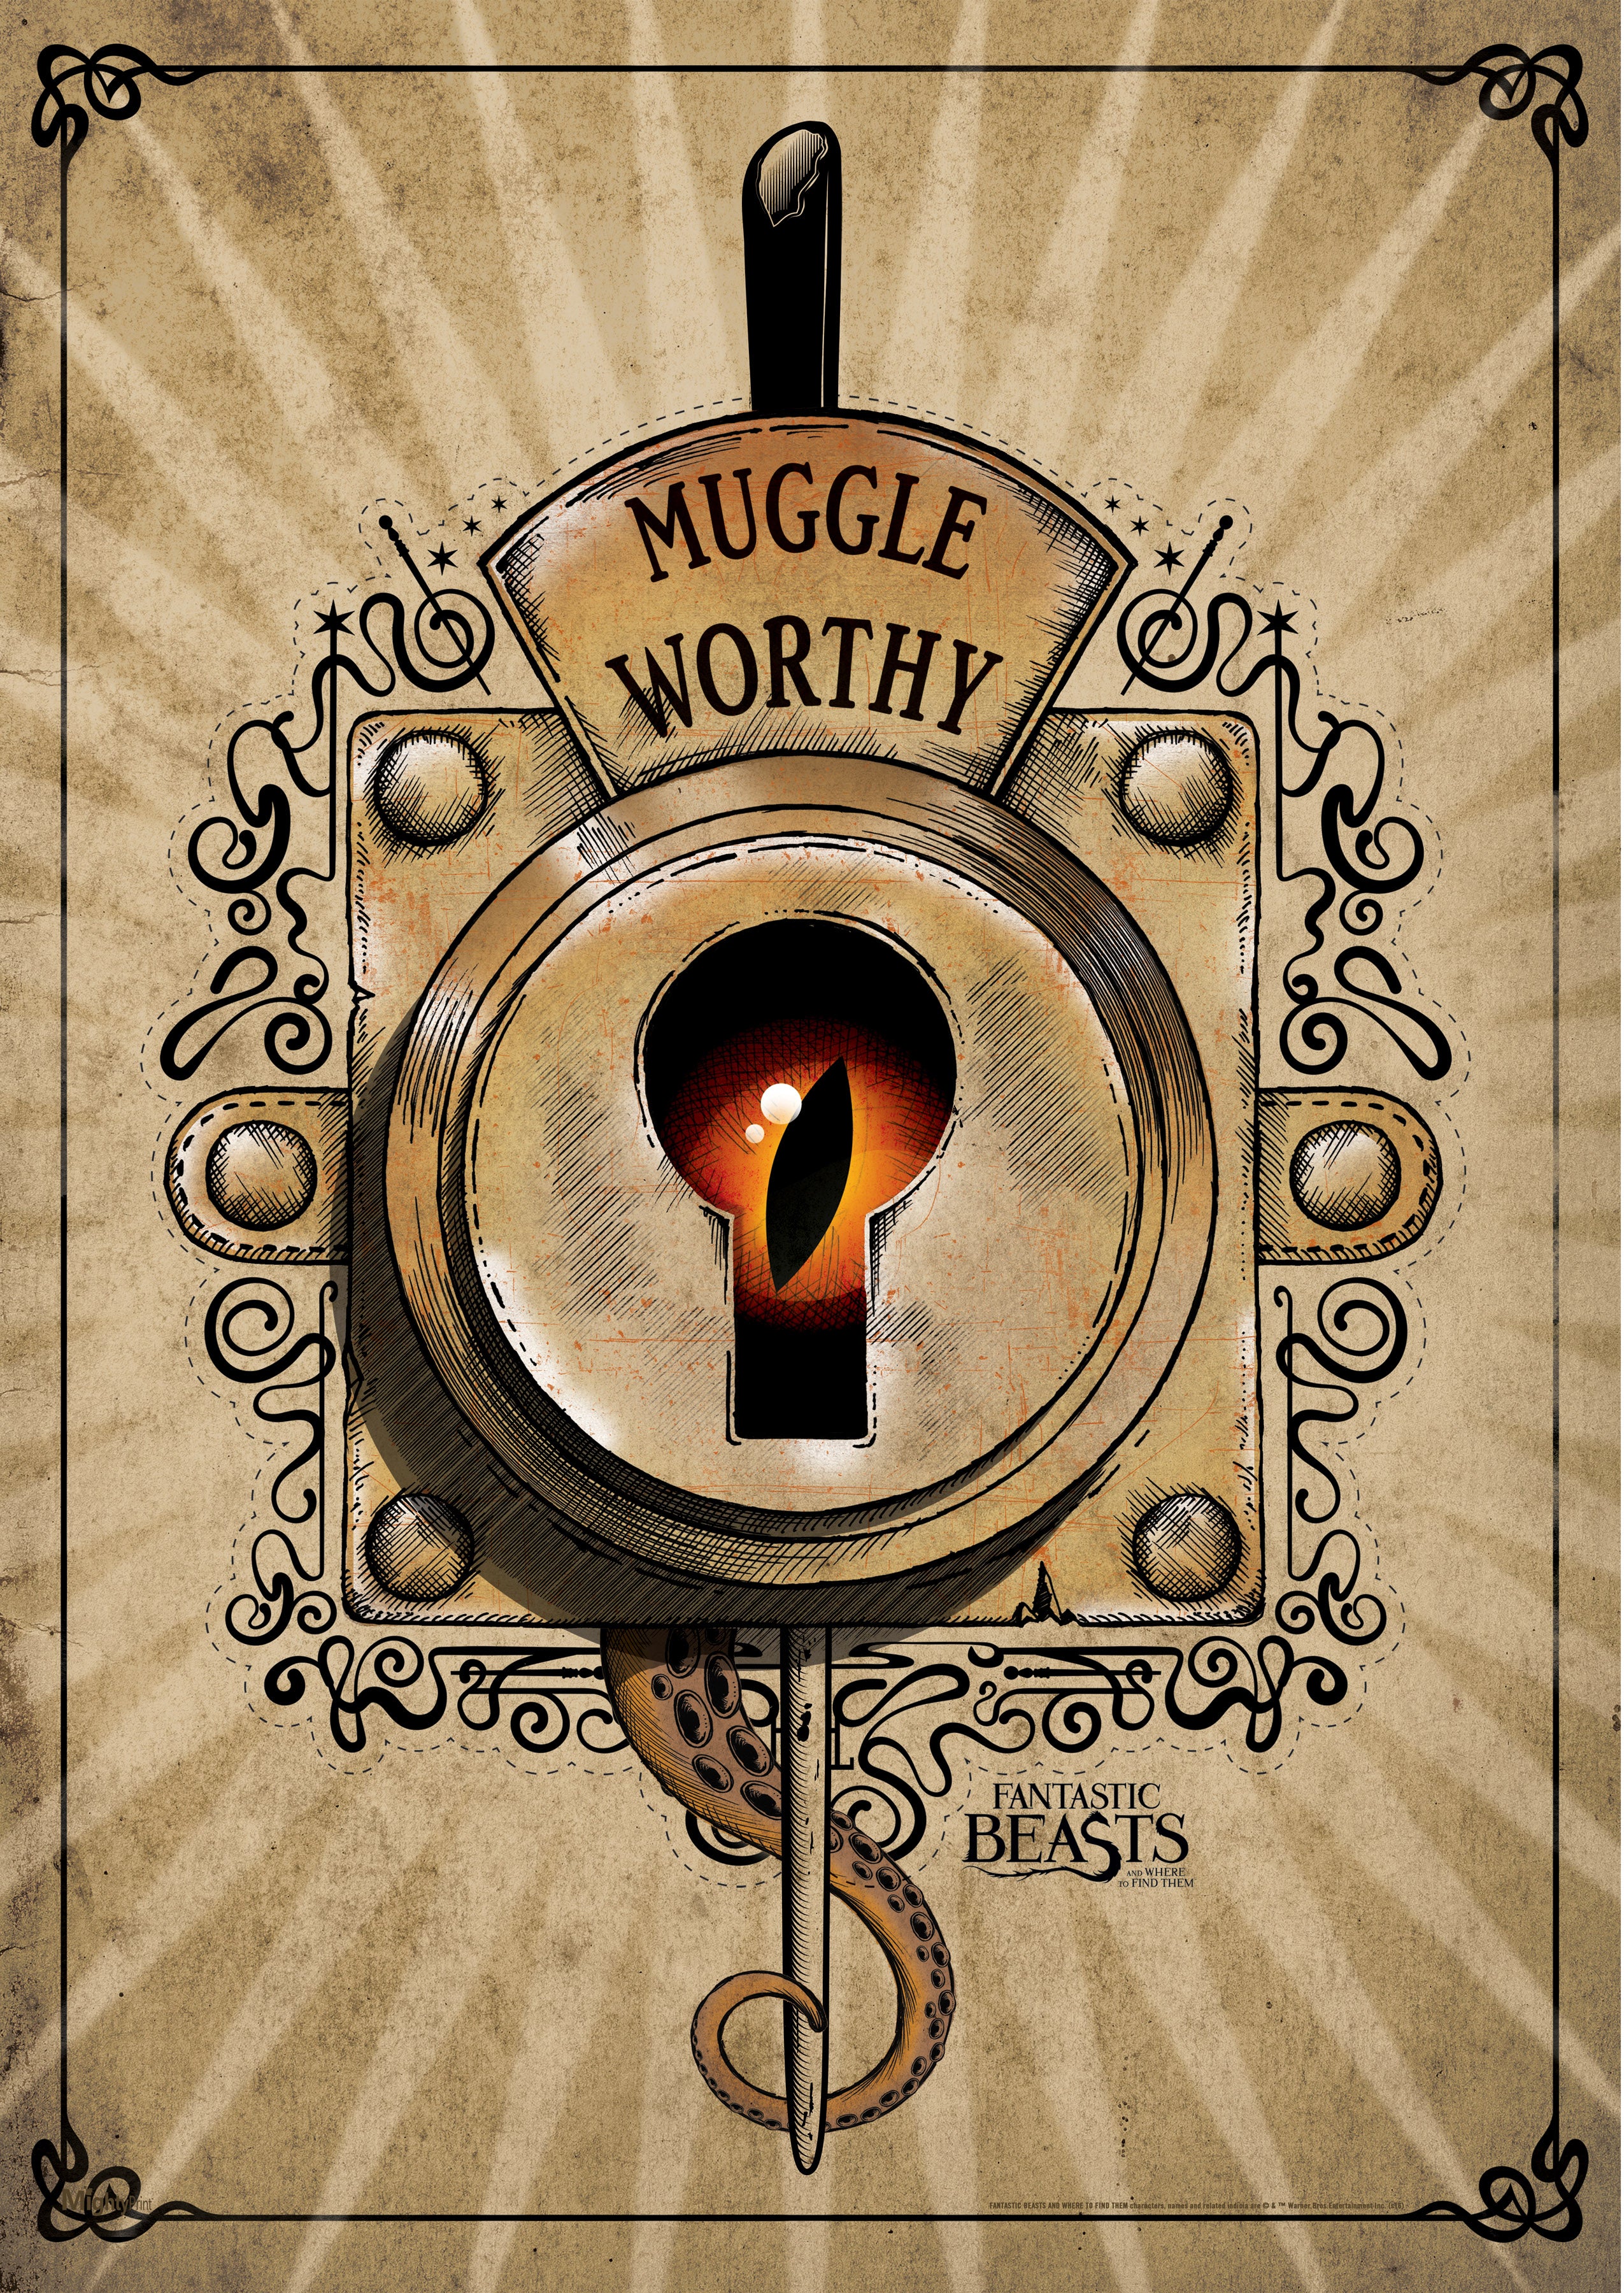 Fantastic Beasts and Where to Find Them (Muggle Worthy) MightyPrint™ Wall Art MP17240262